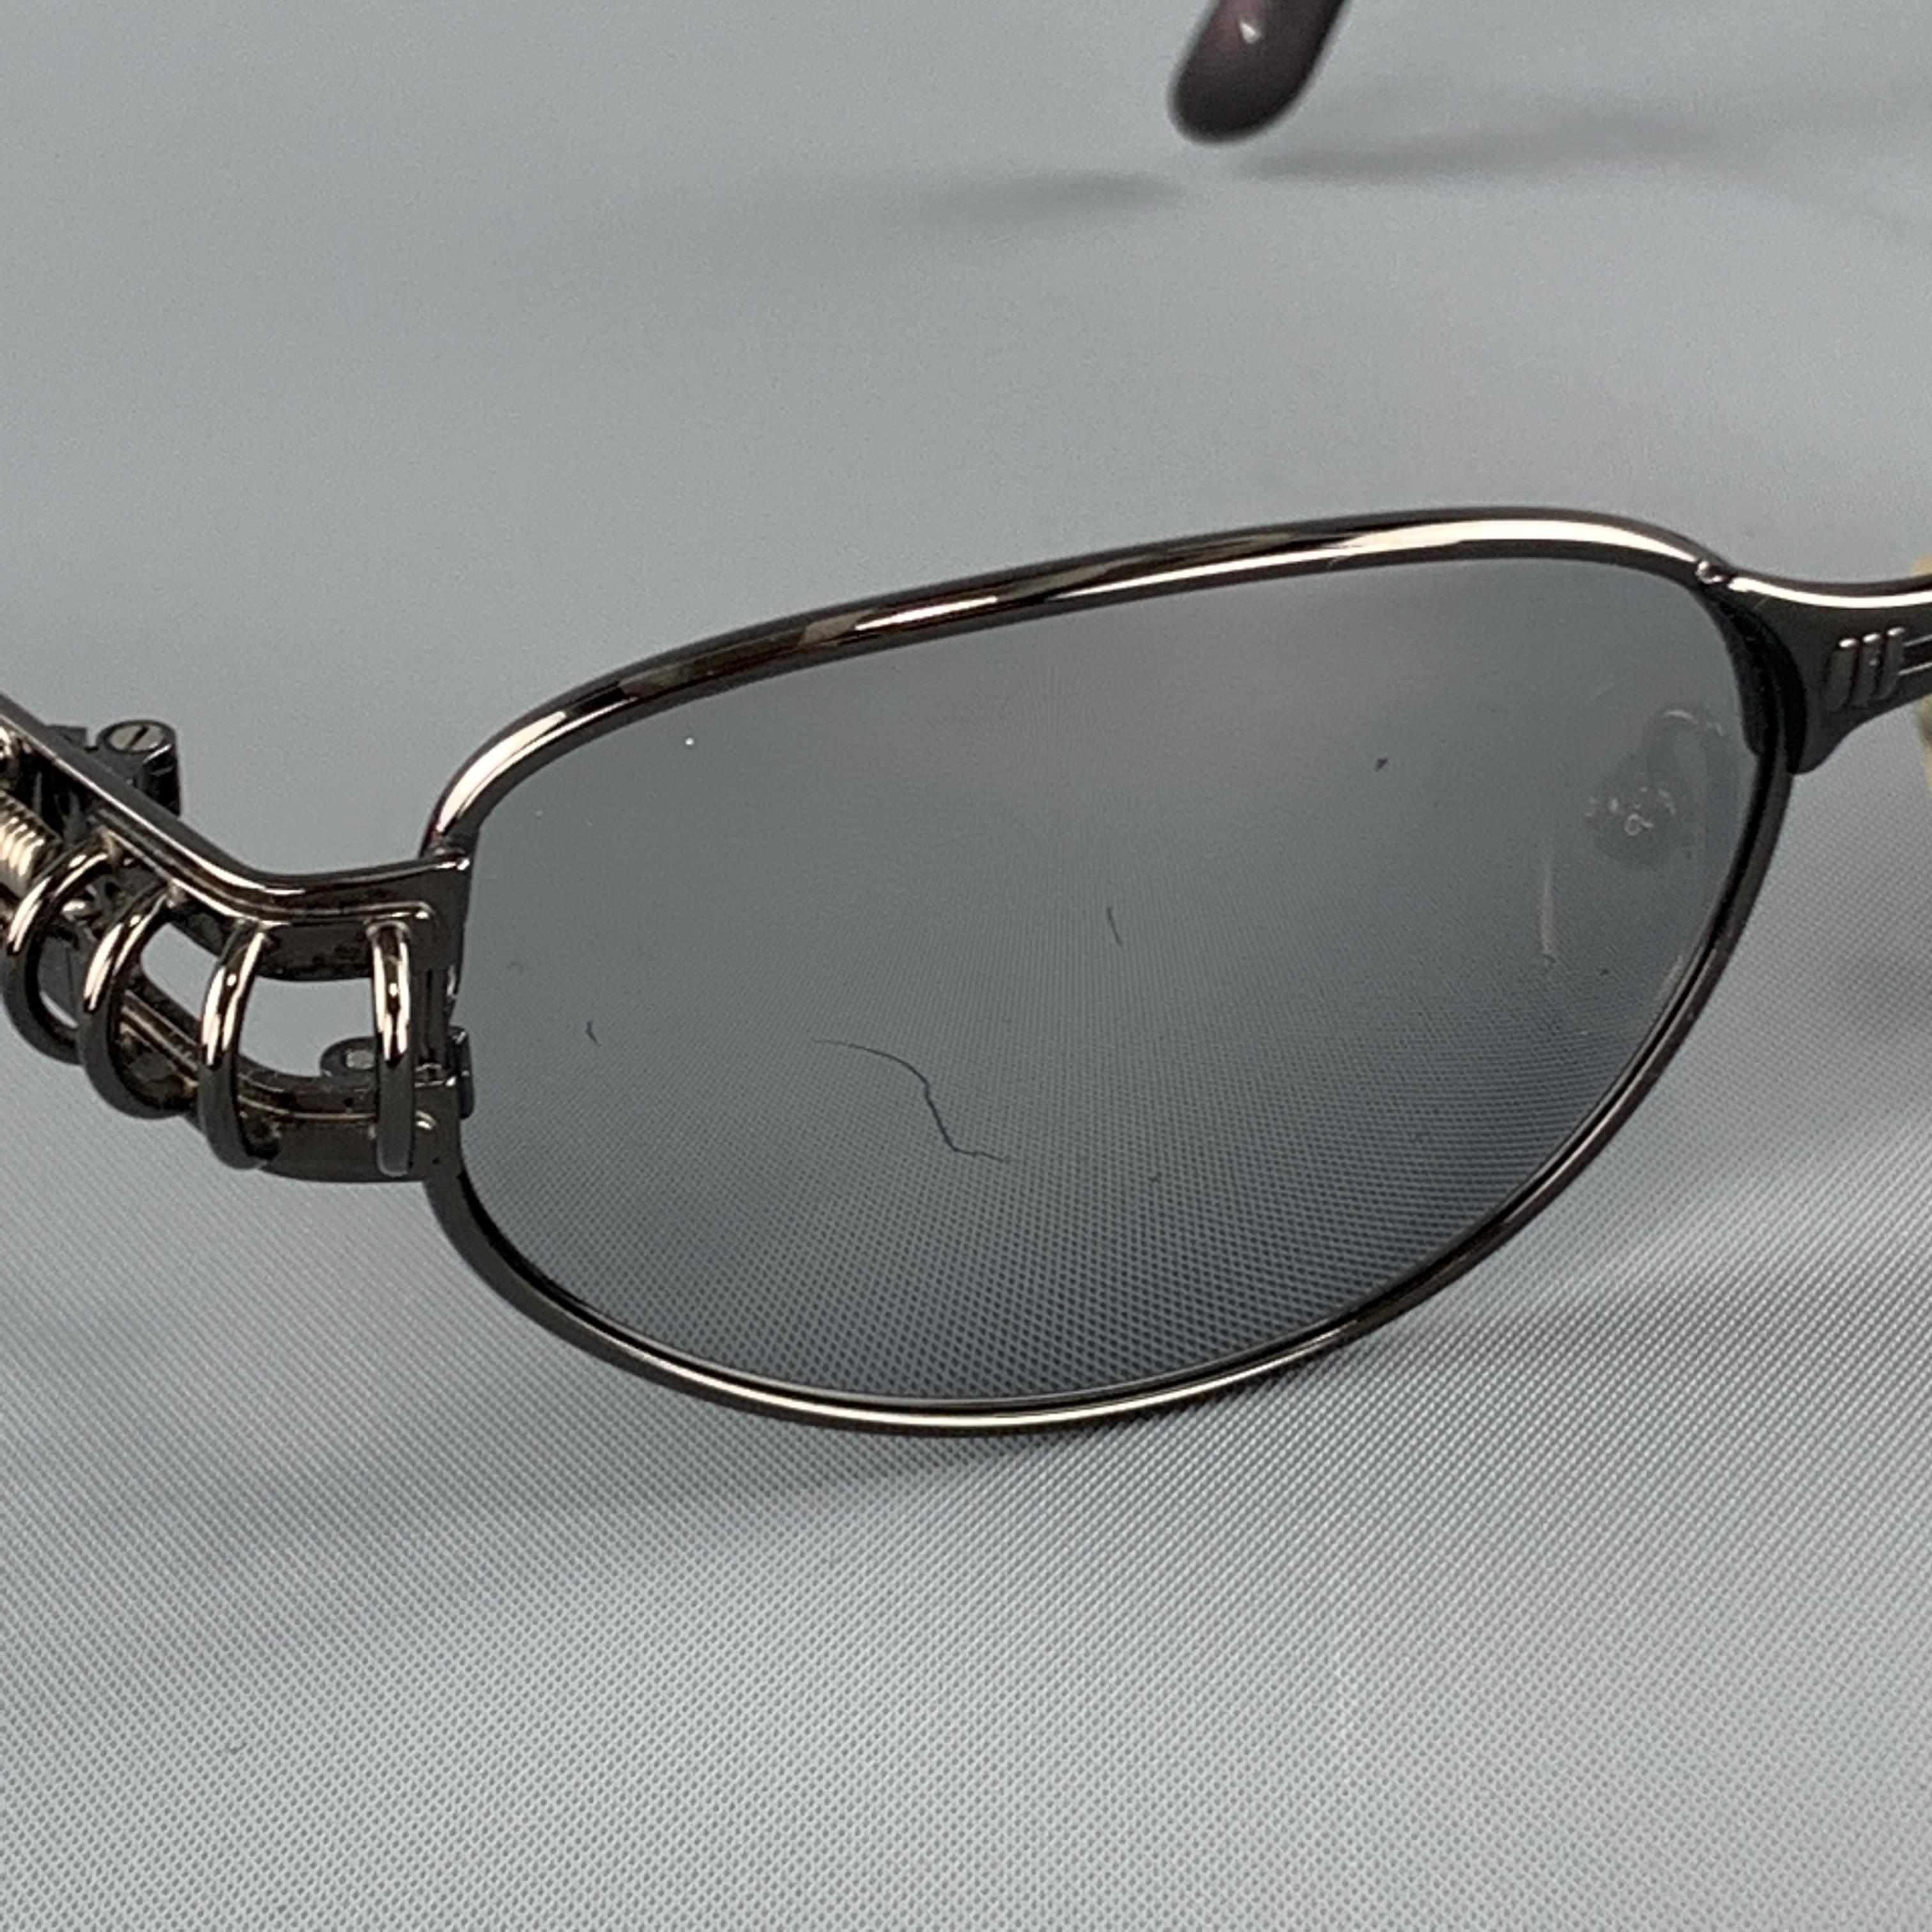 Vintage JEAN PAUL GAULTIR sunglasses come in polished smoke silver tone metal with mirrored lenses and hoop piercing detailed arms. Minor scratches on lenses. With case. Made in Japan

Very Good Pre-Owned Condition.
Marked: